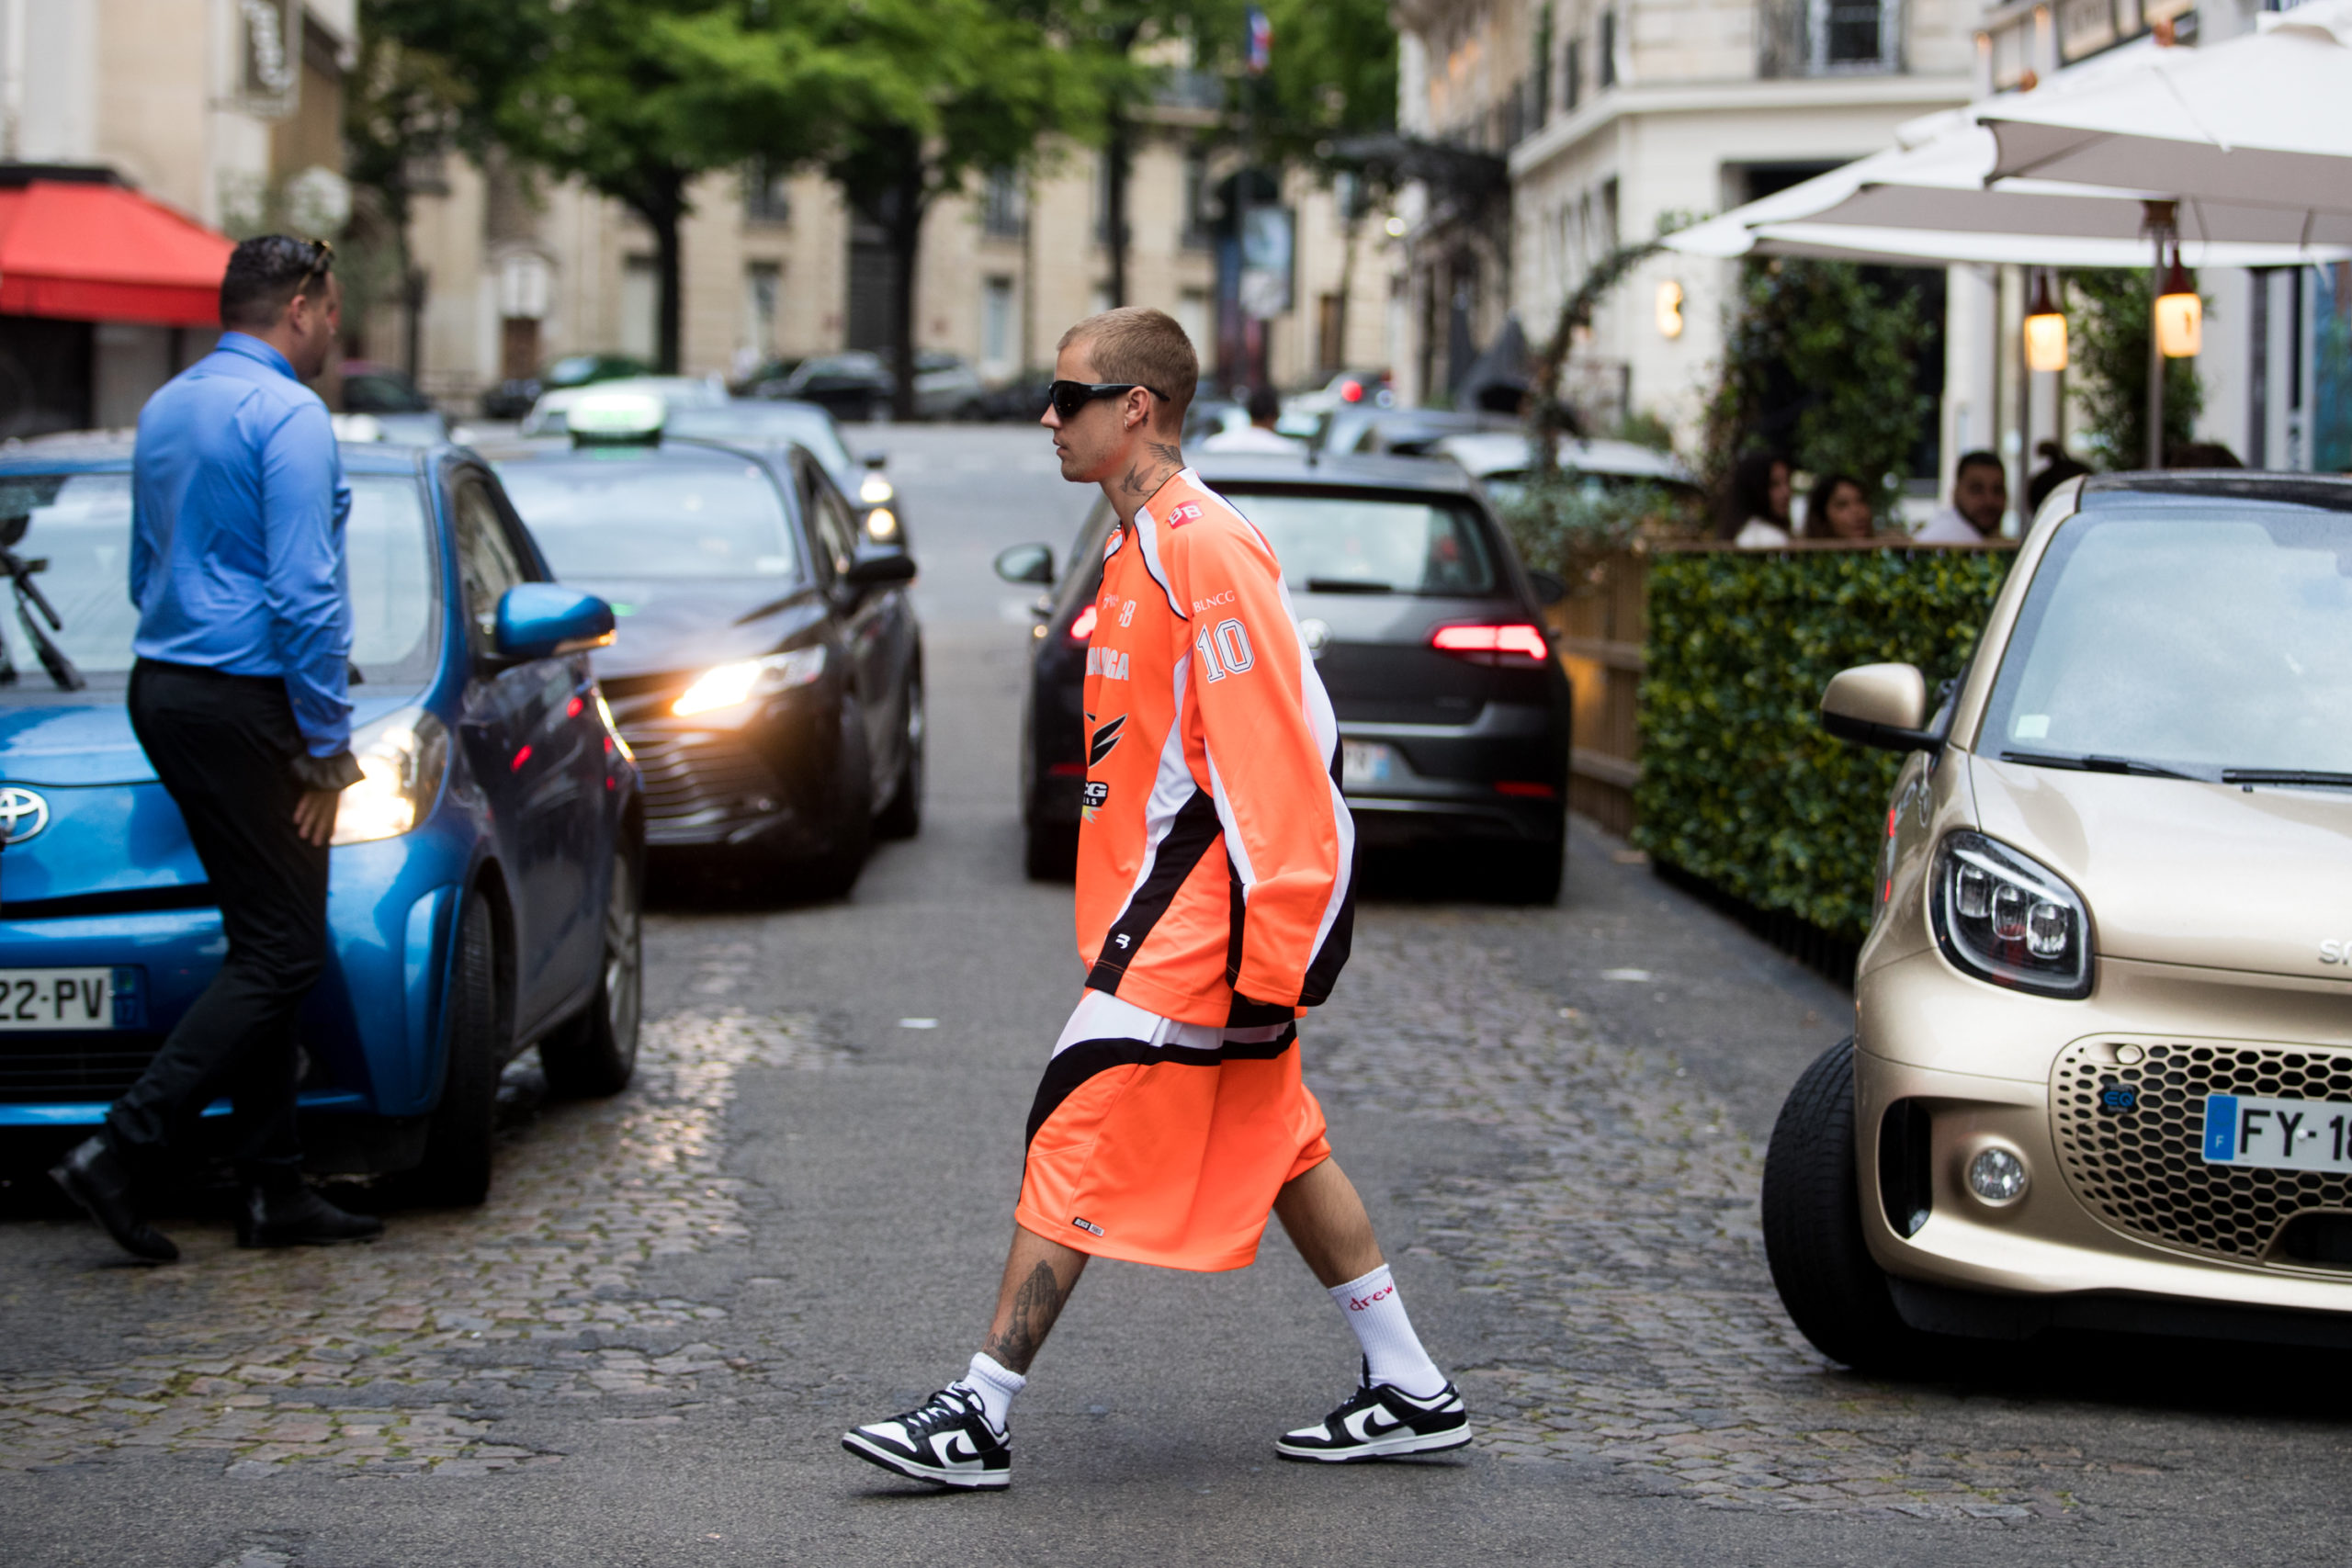 SPOTTED: Justin Bieber in Balenciaga with Hailey Bieber in Paris